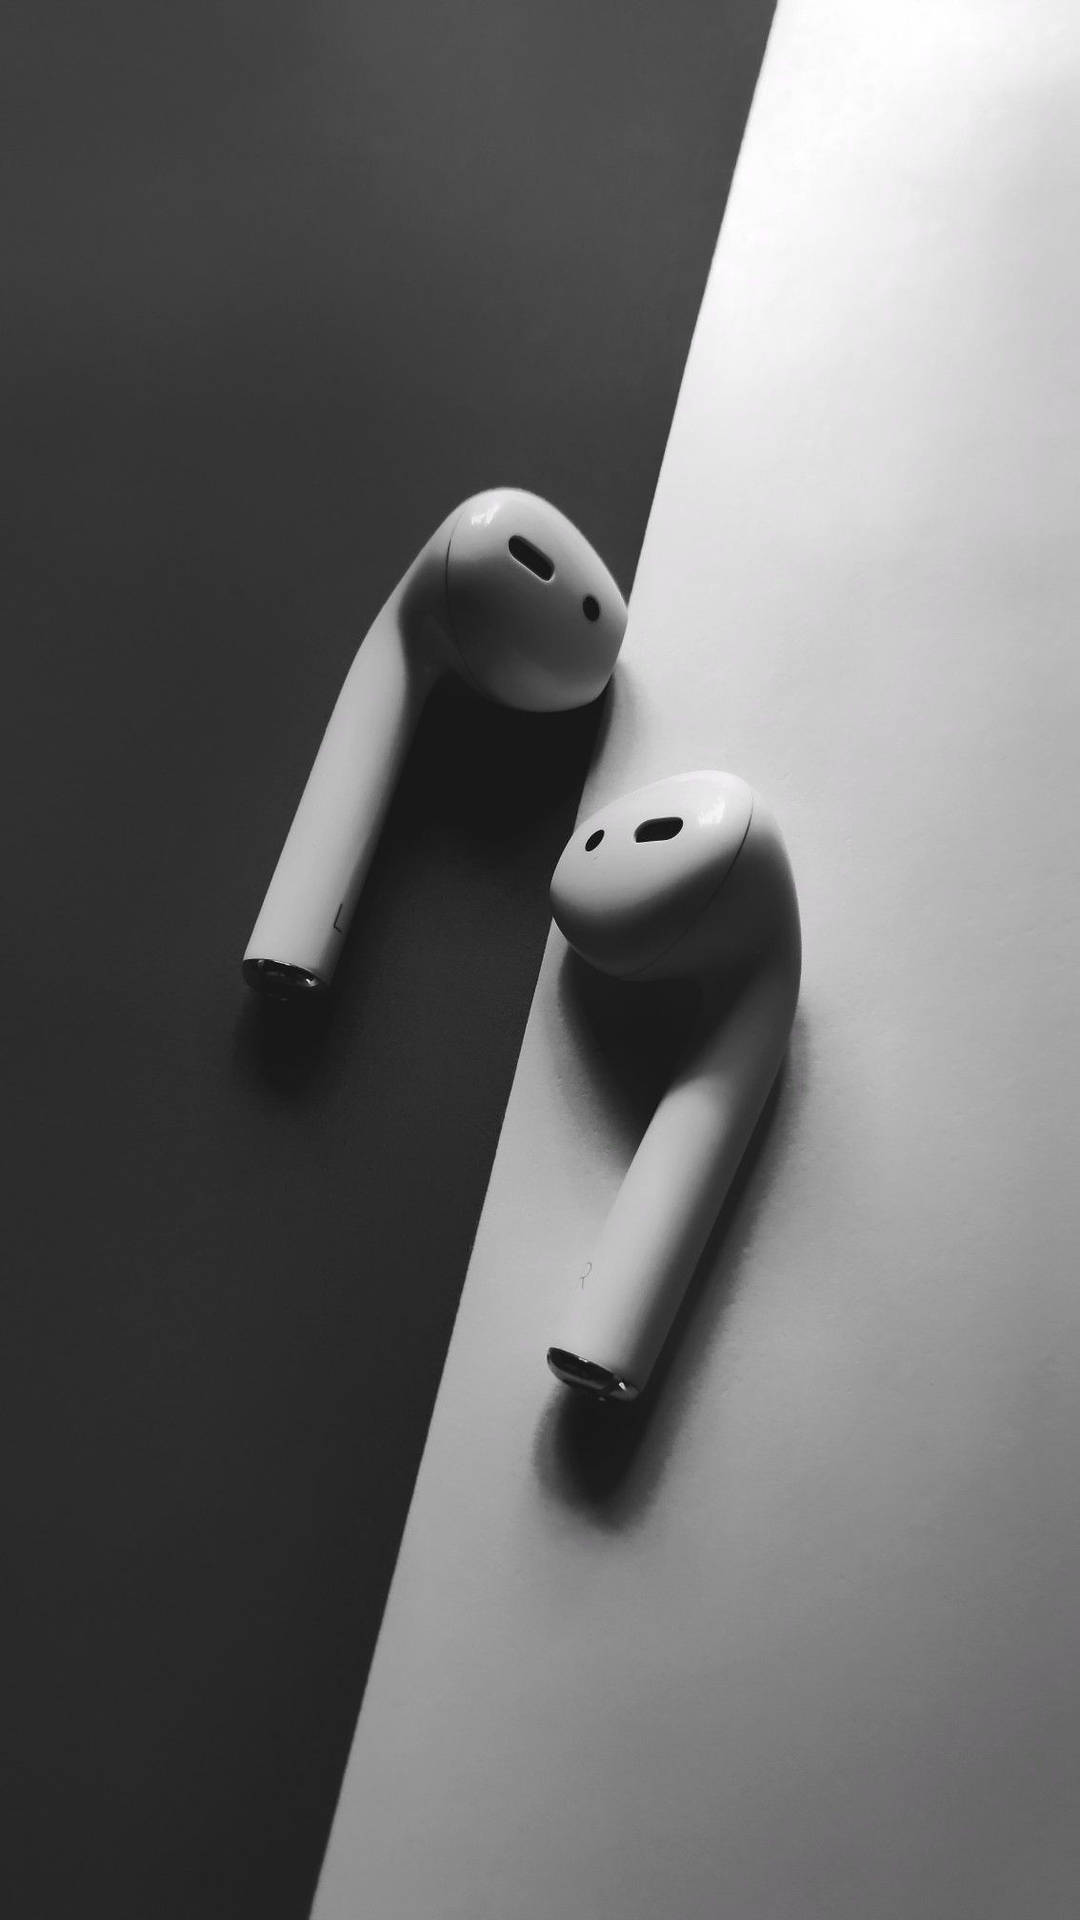 Monochromatic Apple Airpods Background